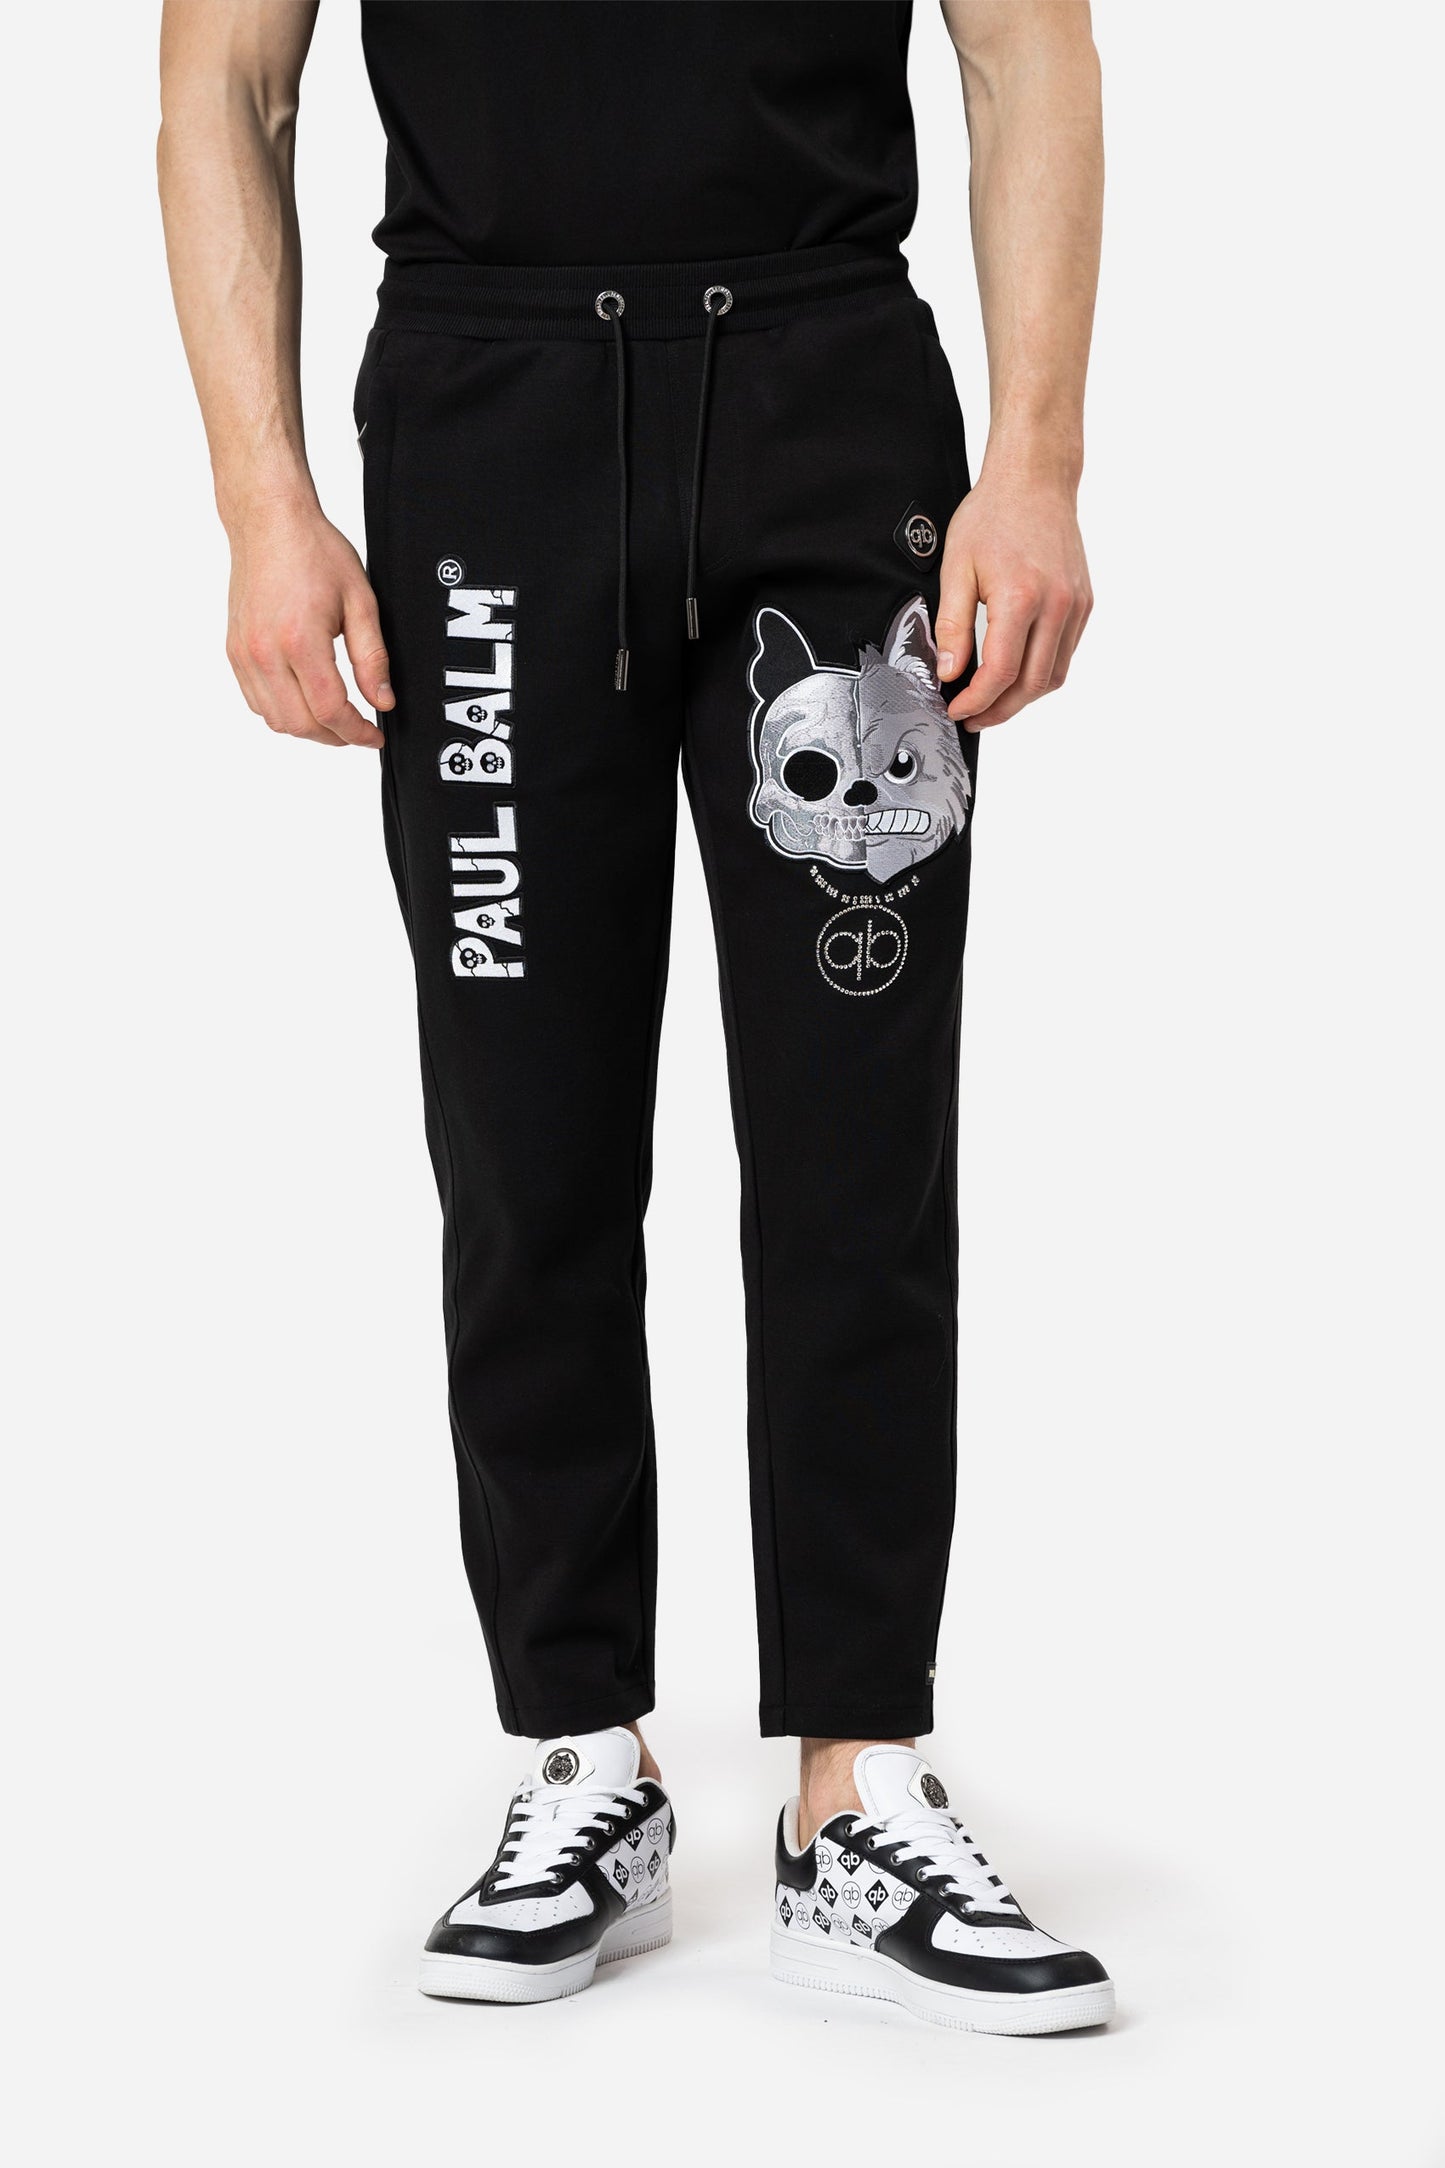 Embroidered Scull Pants - Limited to 300